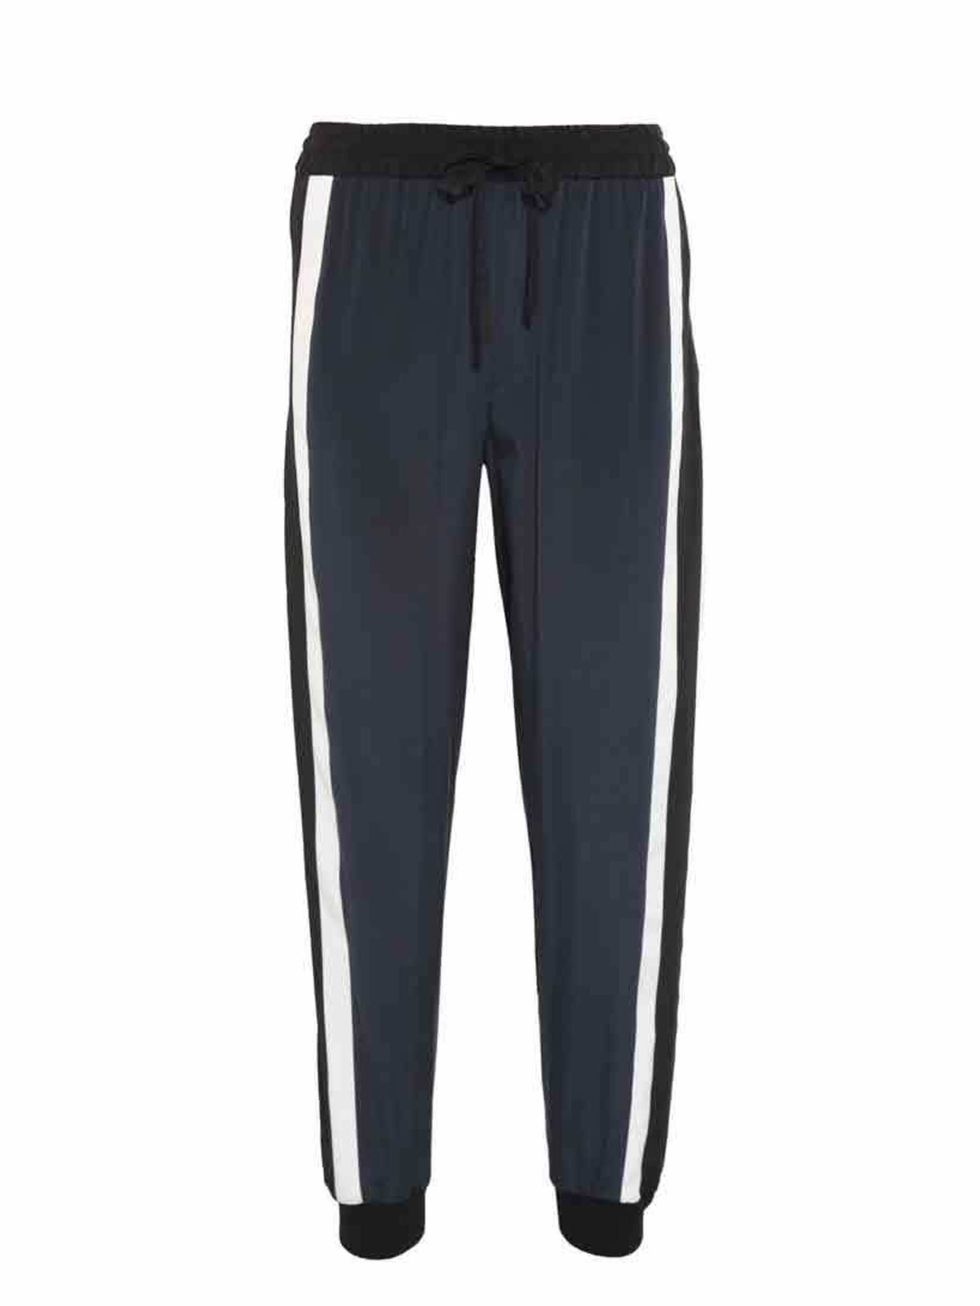 <p>Silk tracksuit pants are an easy and chic way to work this trend.</p><p><a href="http://www.net-a-porter.com/product/443050/DKNY/striped-stretch-silk-track-pants">Trousers DKNY £170 Net-a-porter</a></p>